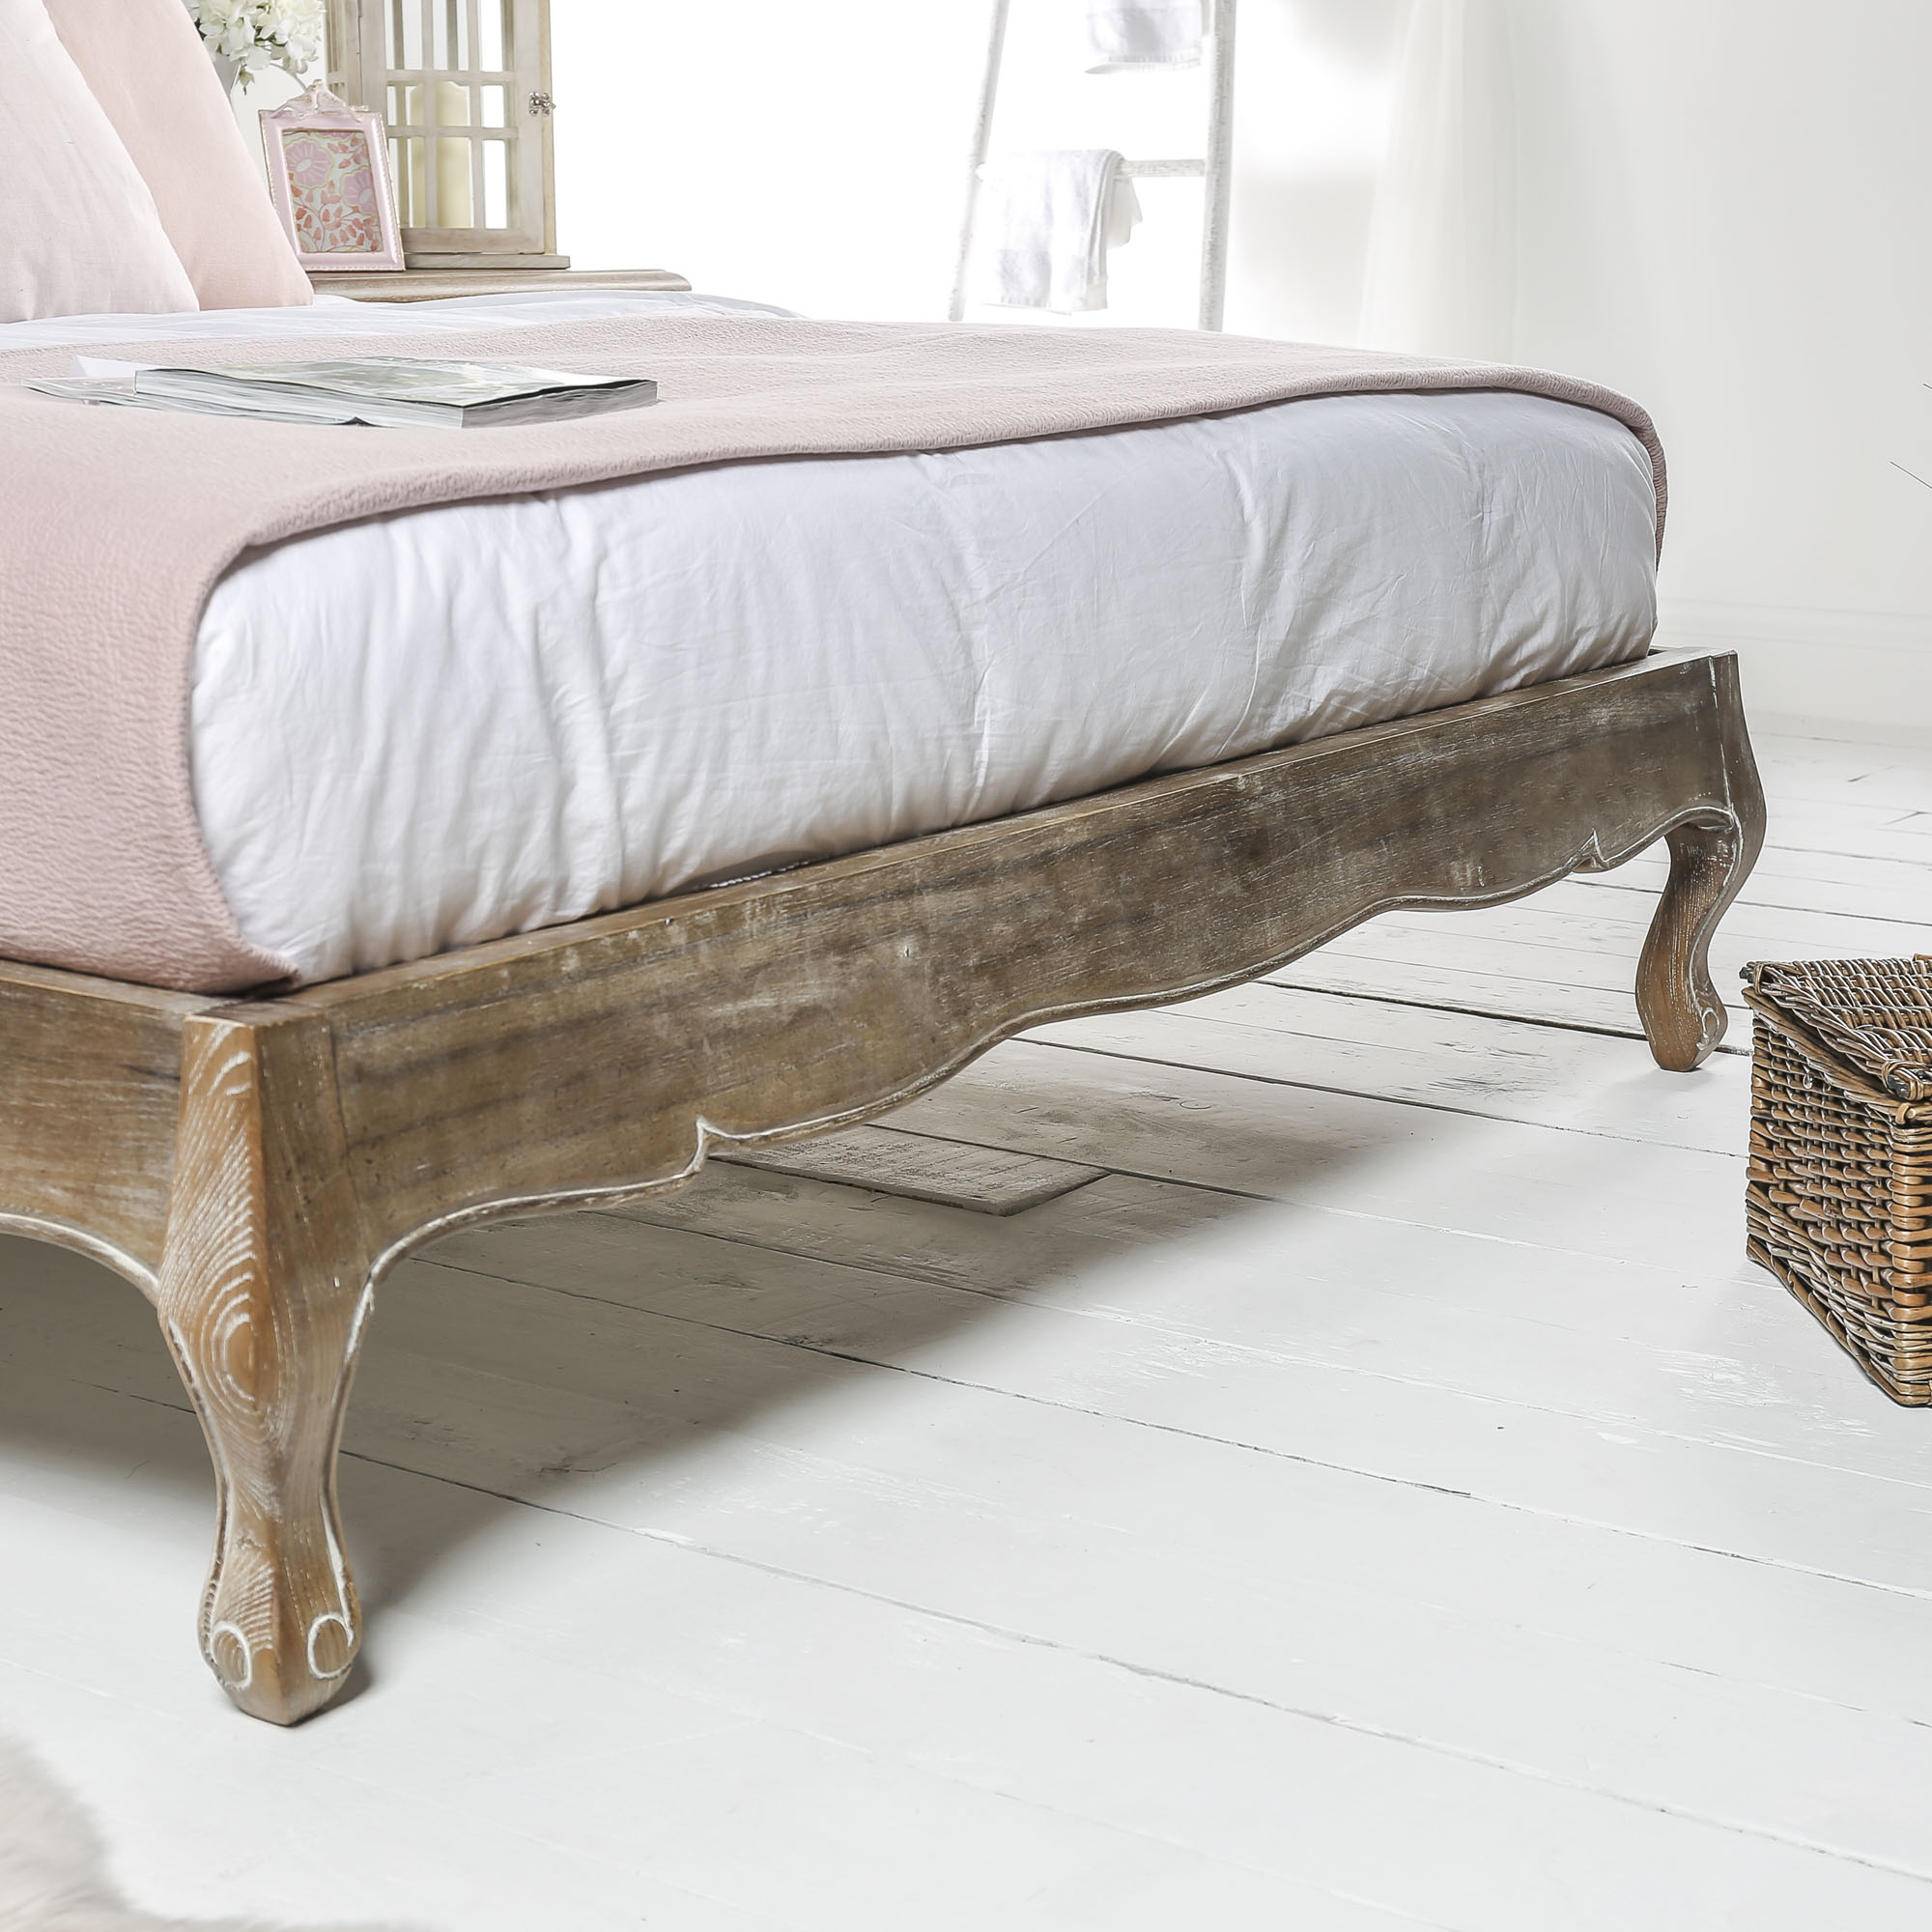 Eloise French Weathered Limed Ash Upholstered Low Foot Board Bed – King Size